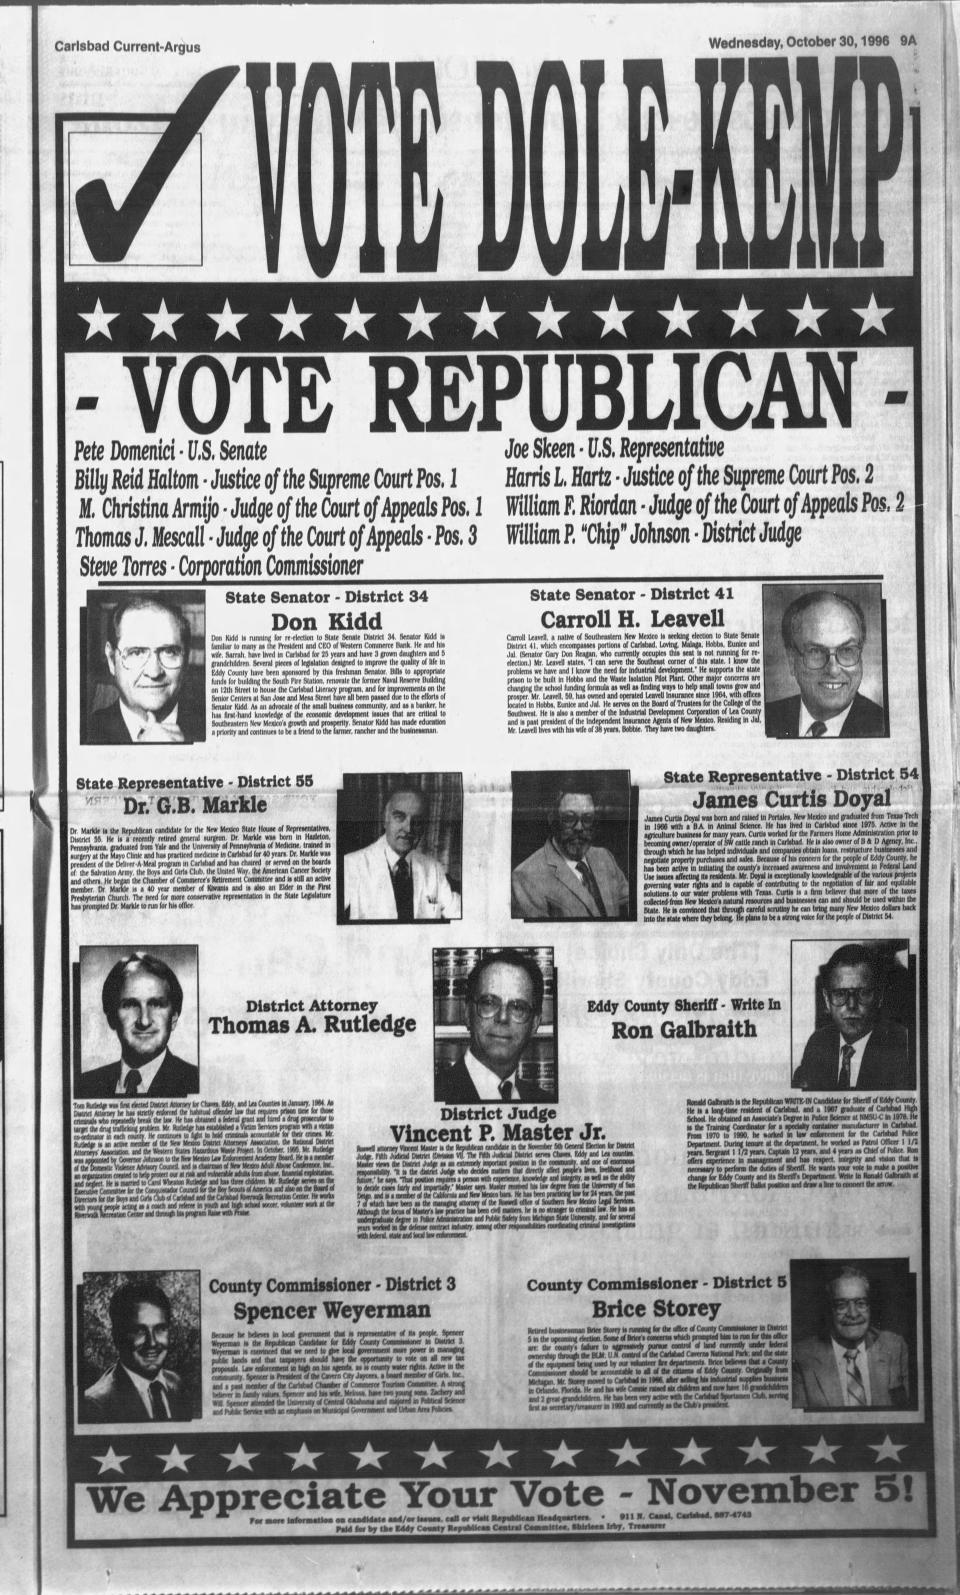 An advertisement for New Mexico Republicans in an October 1996 issue of the Carlsbad Current-Argus